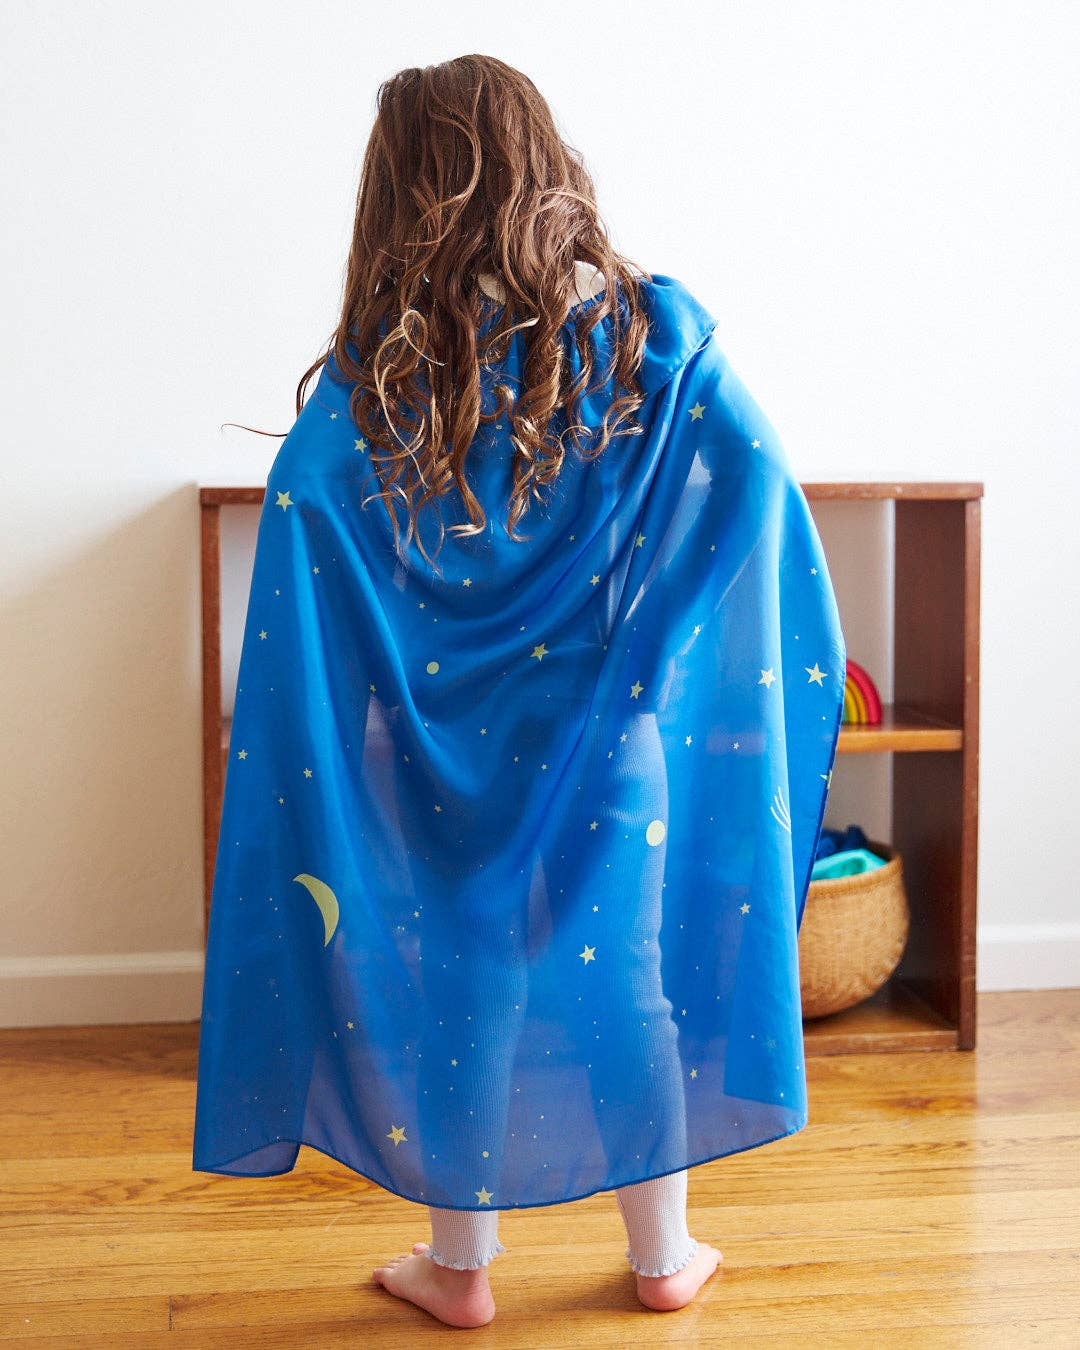 100% Silk Capes for Dress Up & Pretend Play: 1 / Rainbow